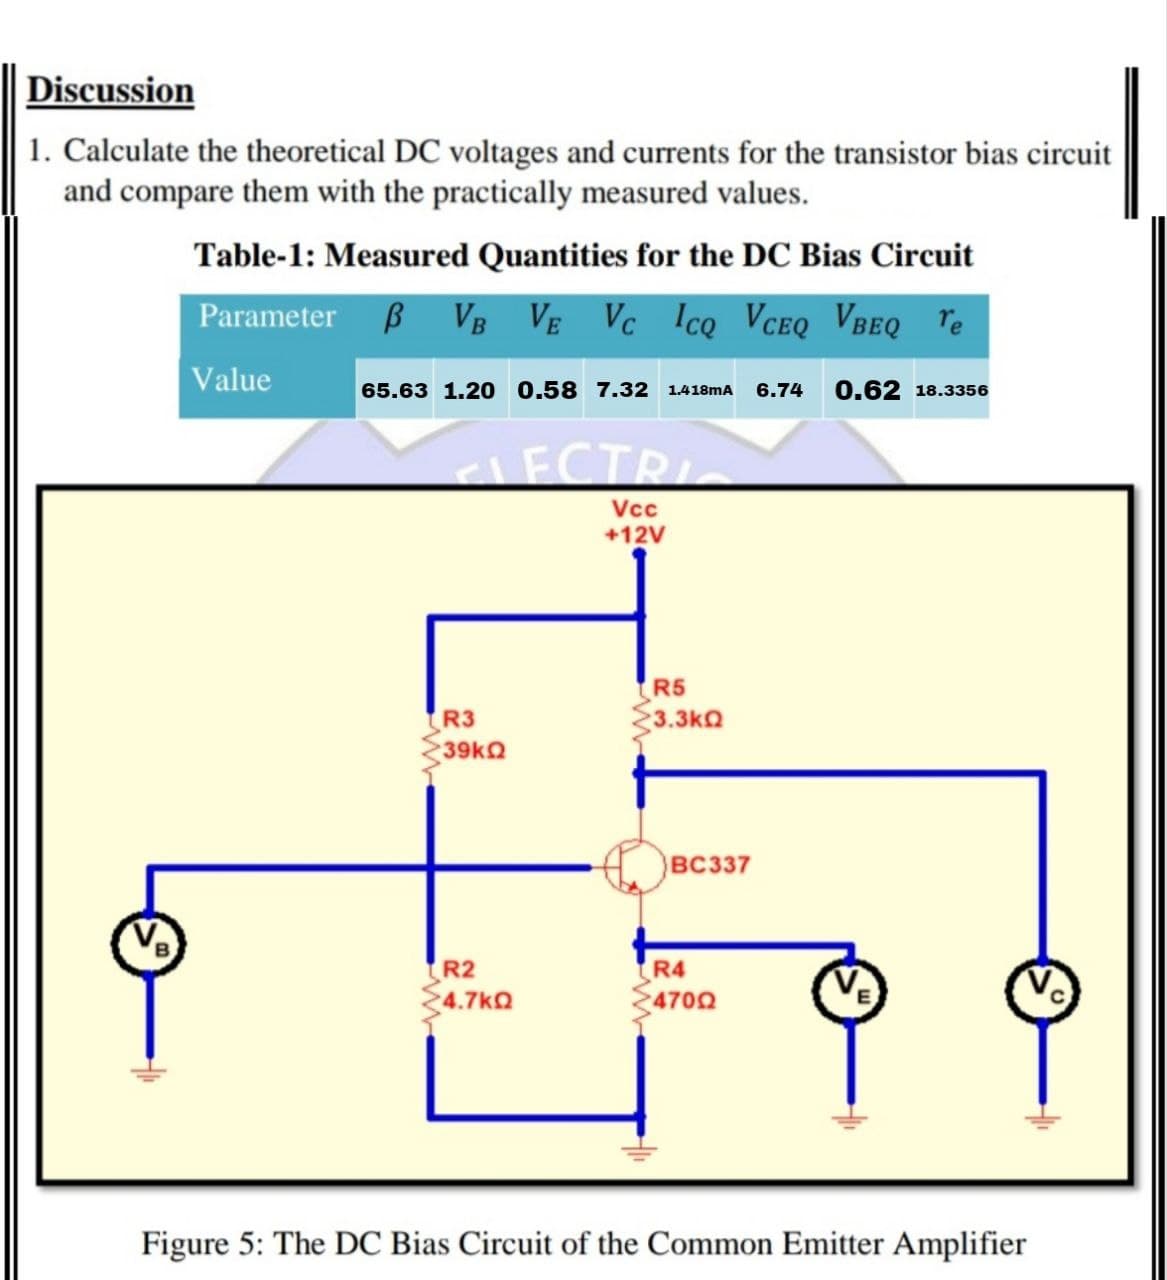 Discussion
1. Calculate the theoretical DC voltages and currents for the transistor bias circuit
and compare them with the practically measured values.
Table-1: Measured Quantities for the DC Bias Circuit
Parameter B VB VE Vc Icọ VCEQ VBEQ Te
Value
65.63 1.20 0.58 7.32 1418mA
6.74
0,62 18.3356
ECTR
Vcc
+12V
R5
R3
3.3kQ
всз37
R2
R4
4.7kQ
4700
Figure 5: The DC Bias Circuit of the Common Emitter Amplifier
